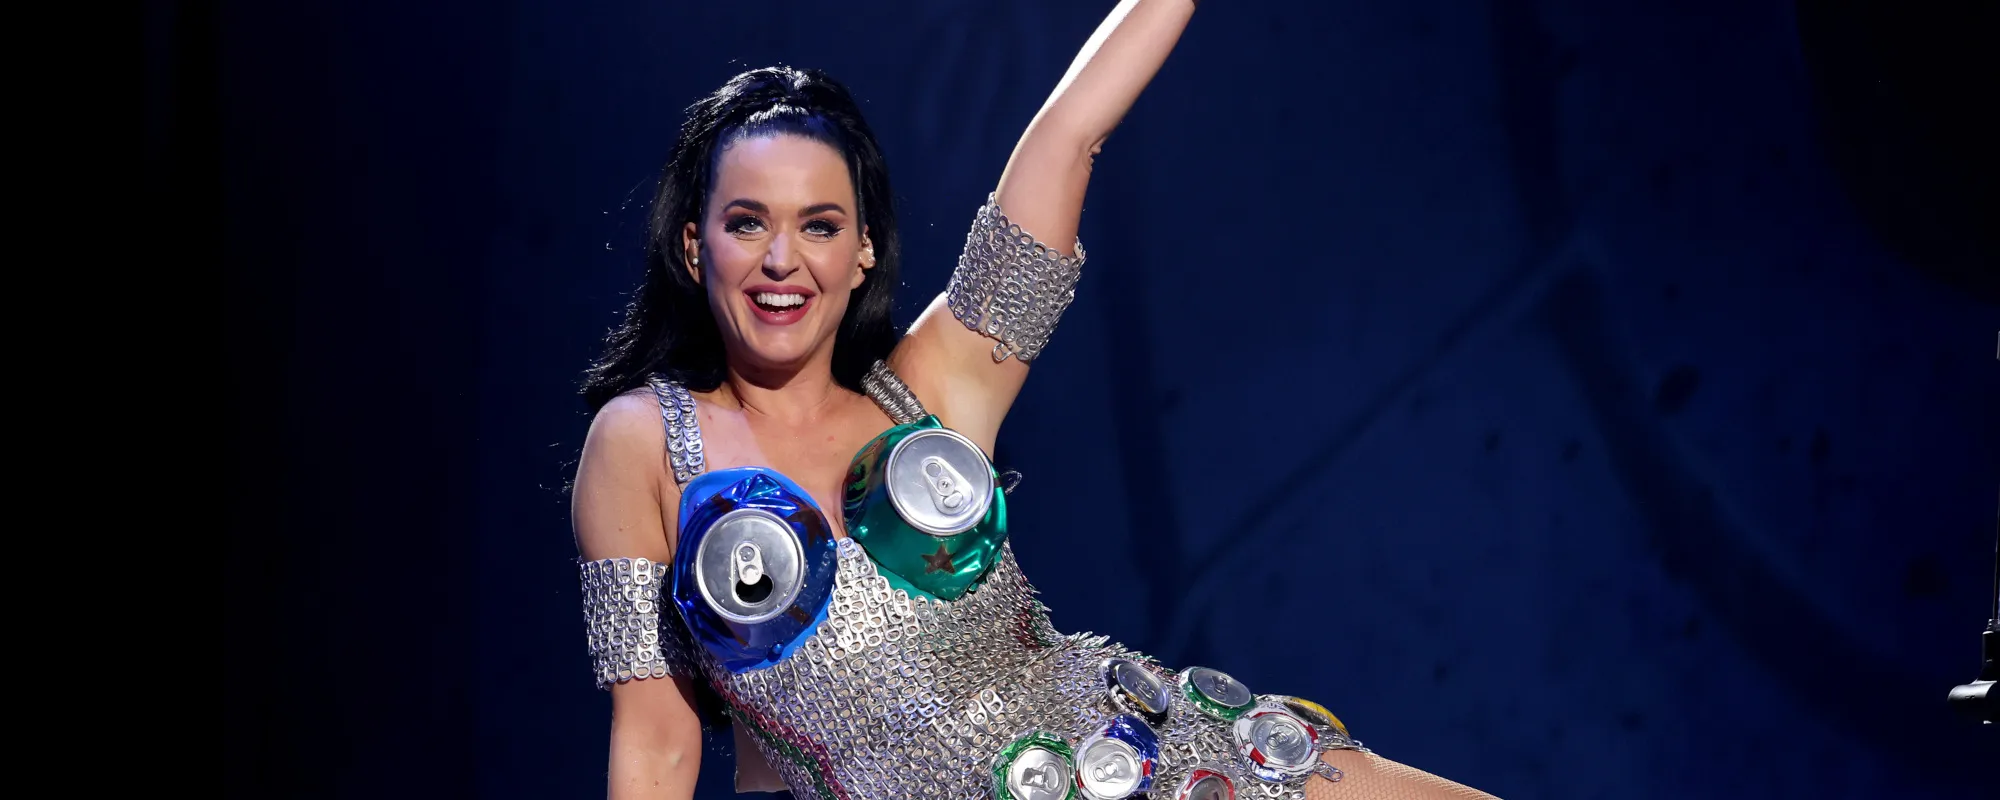 Katy Perry Hints at New Music – ‘I’ll Probably Go and Make Another Record Soon’